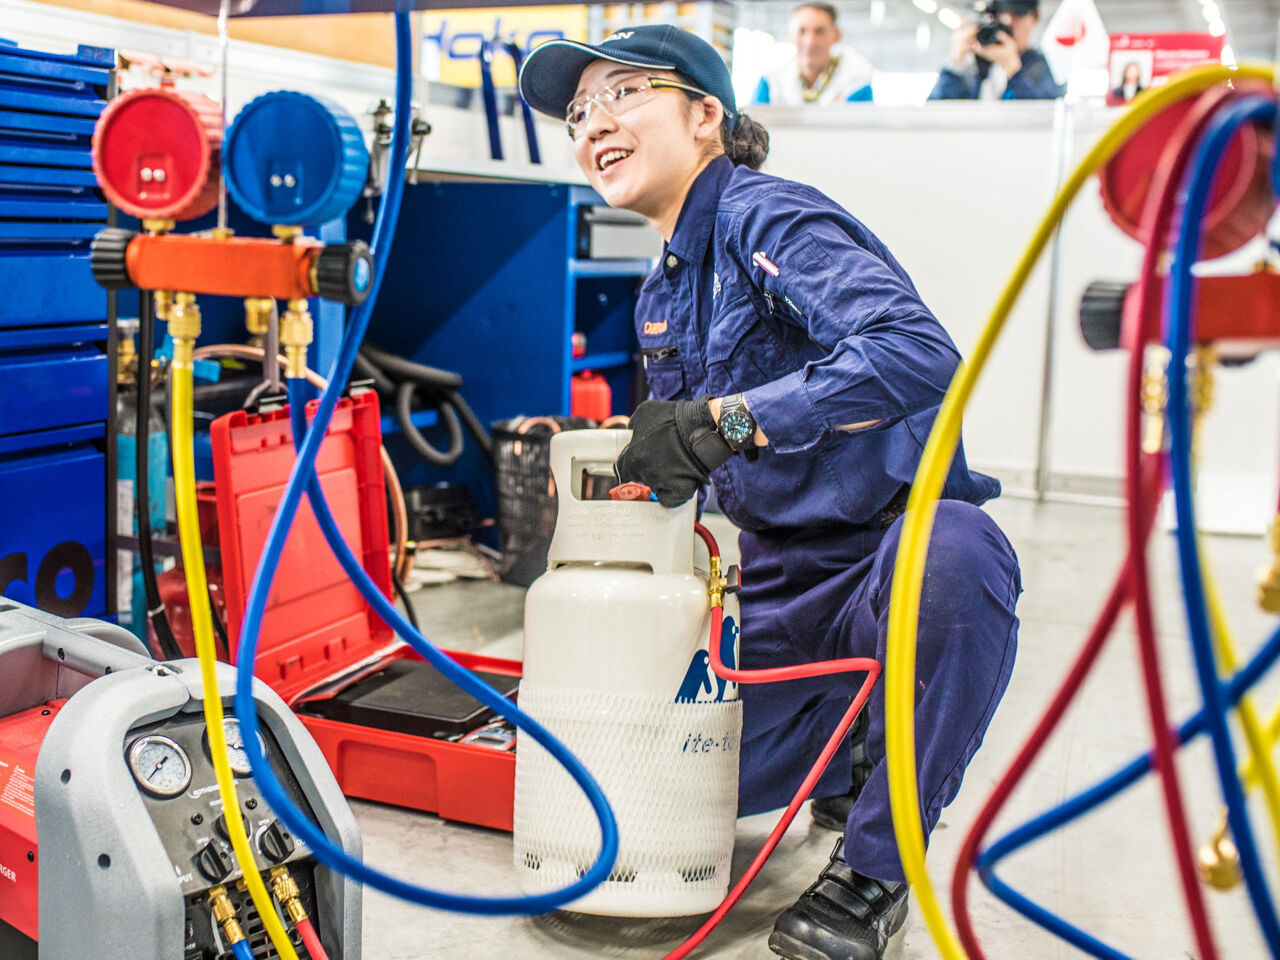 A refrigeration and air conditioning competitor from Japan at WorldSkills Kazan 2019.